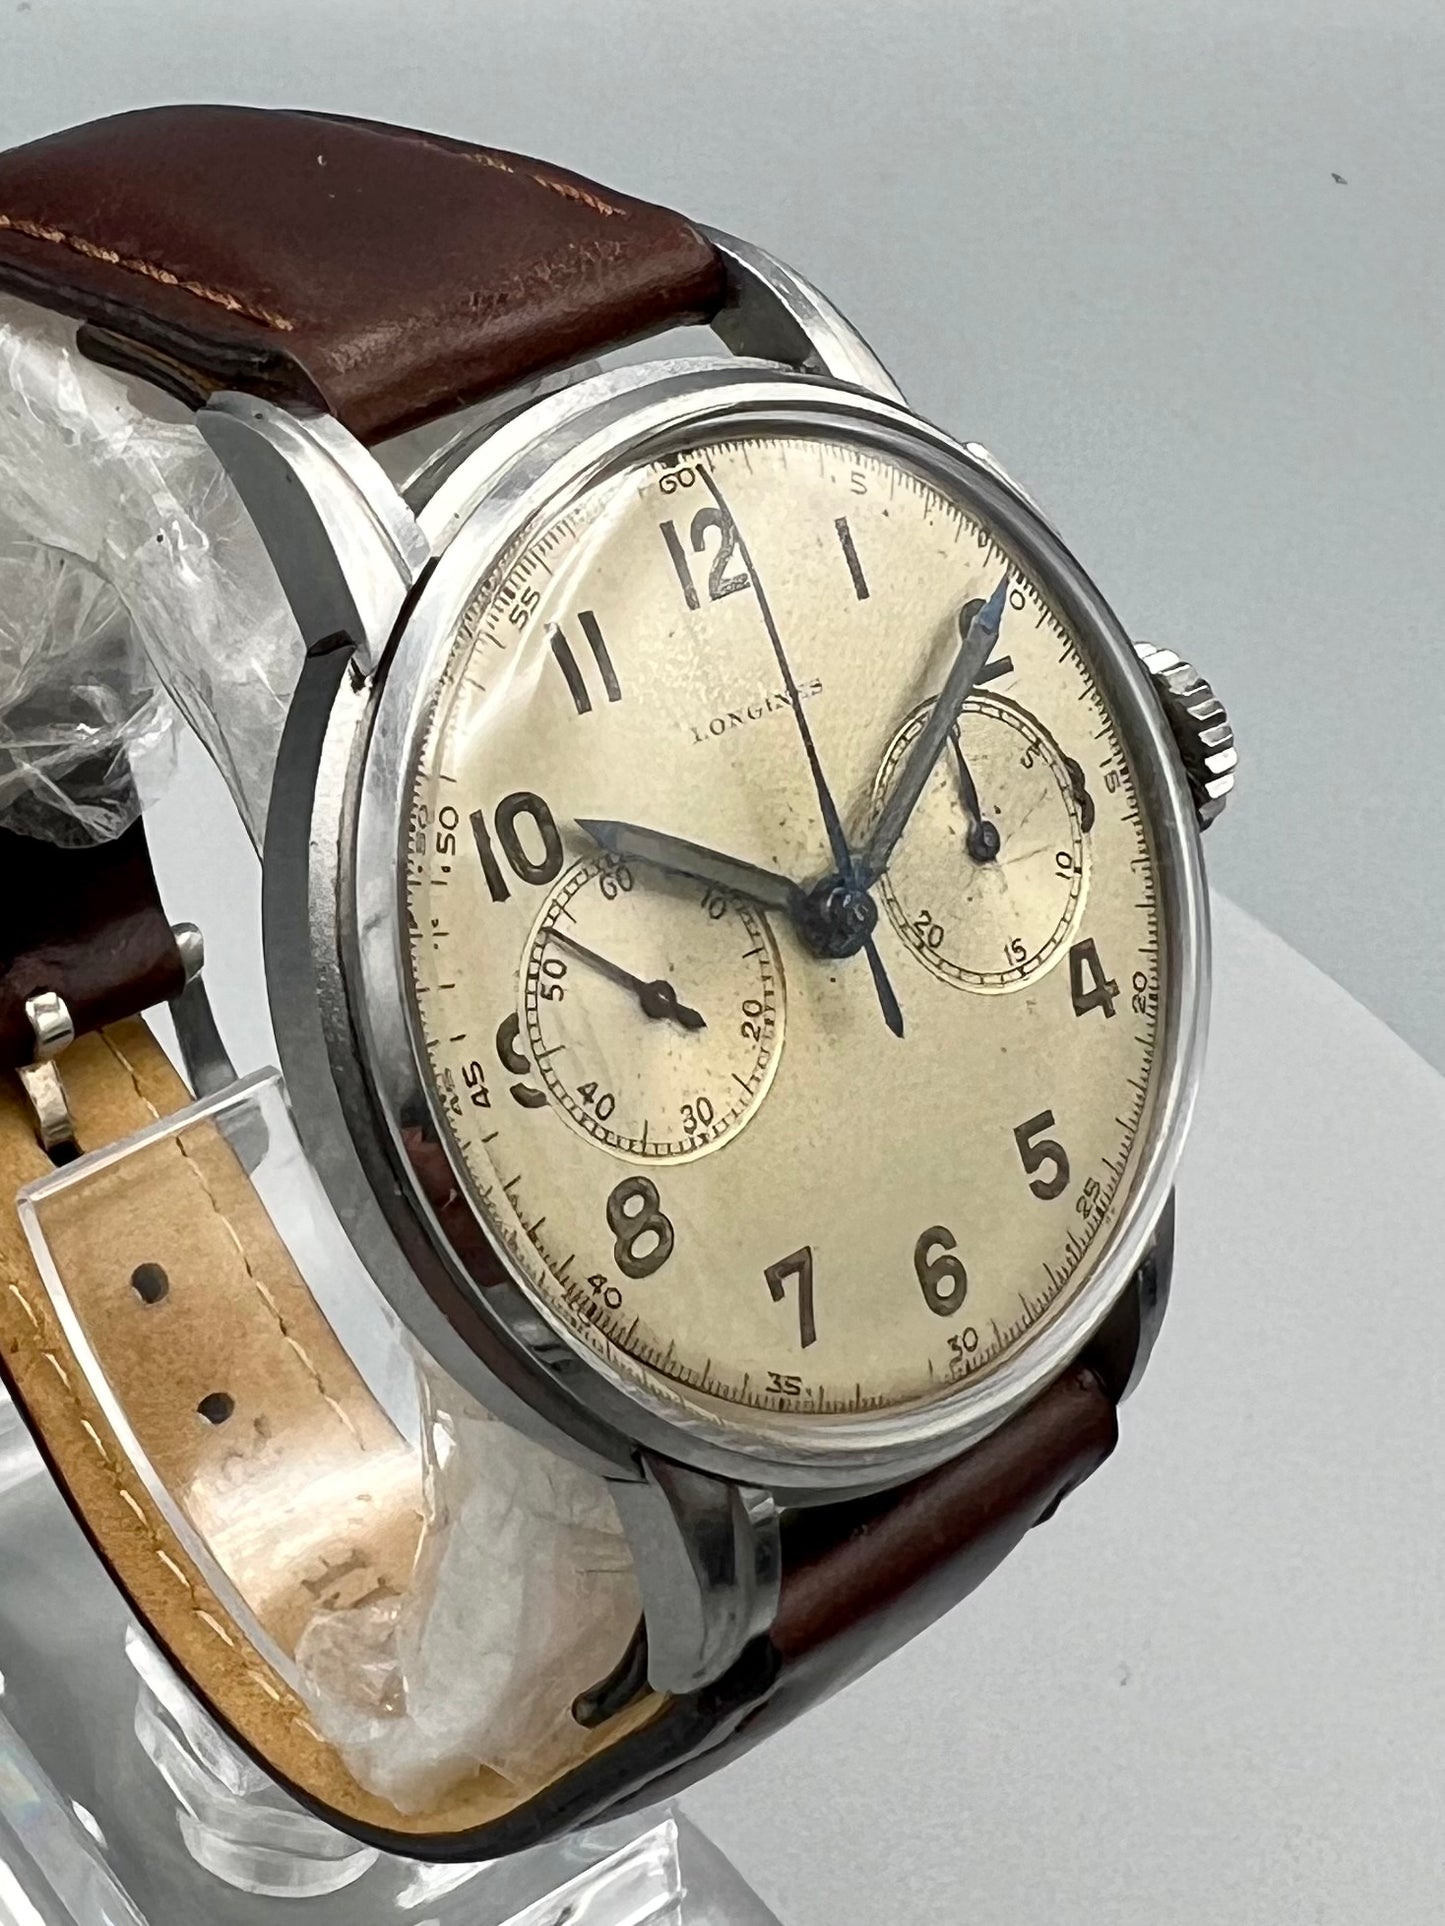 Longines Ref 13 ZN Flyback Rare Stepped Lugs Chrono, 37.5 mm, 1940s